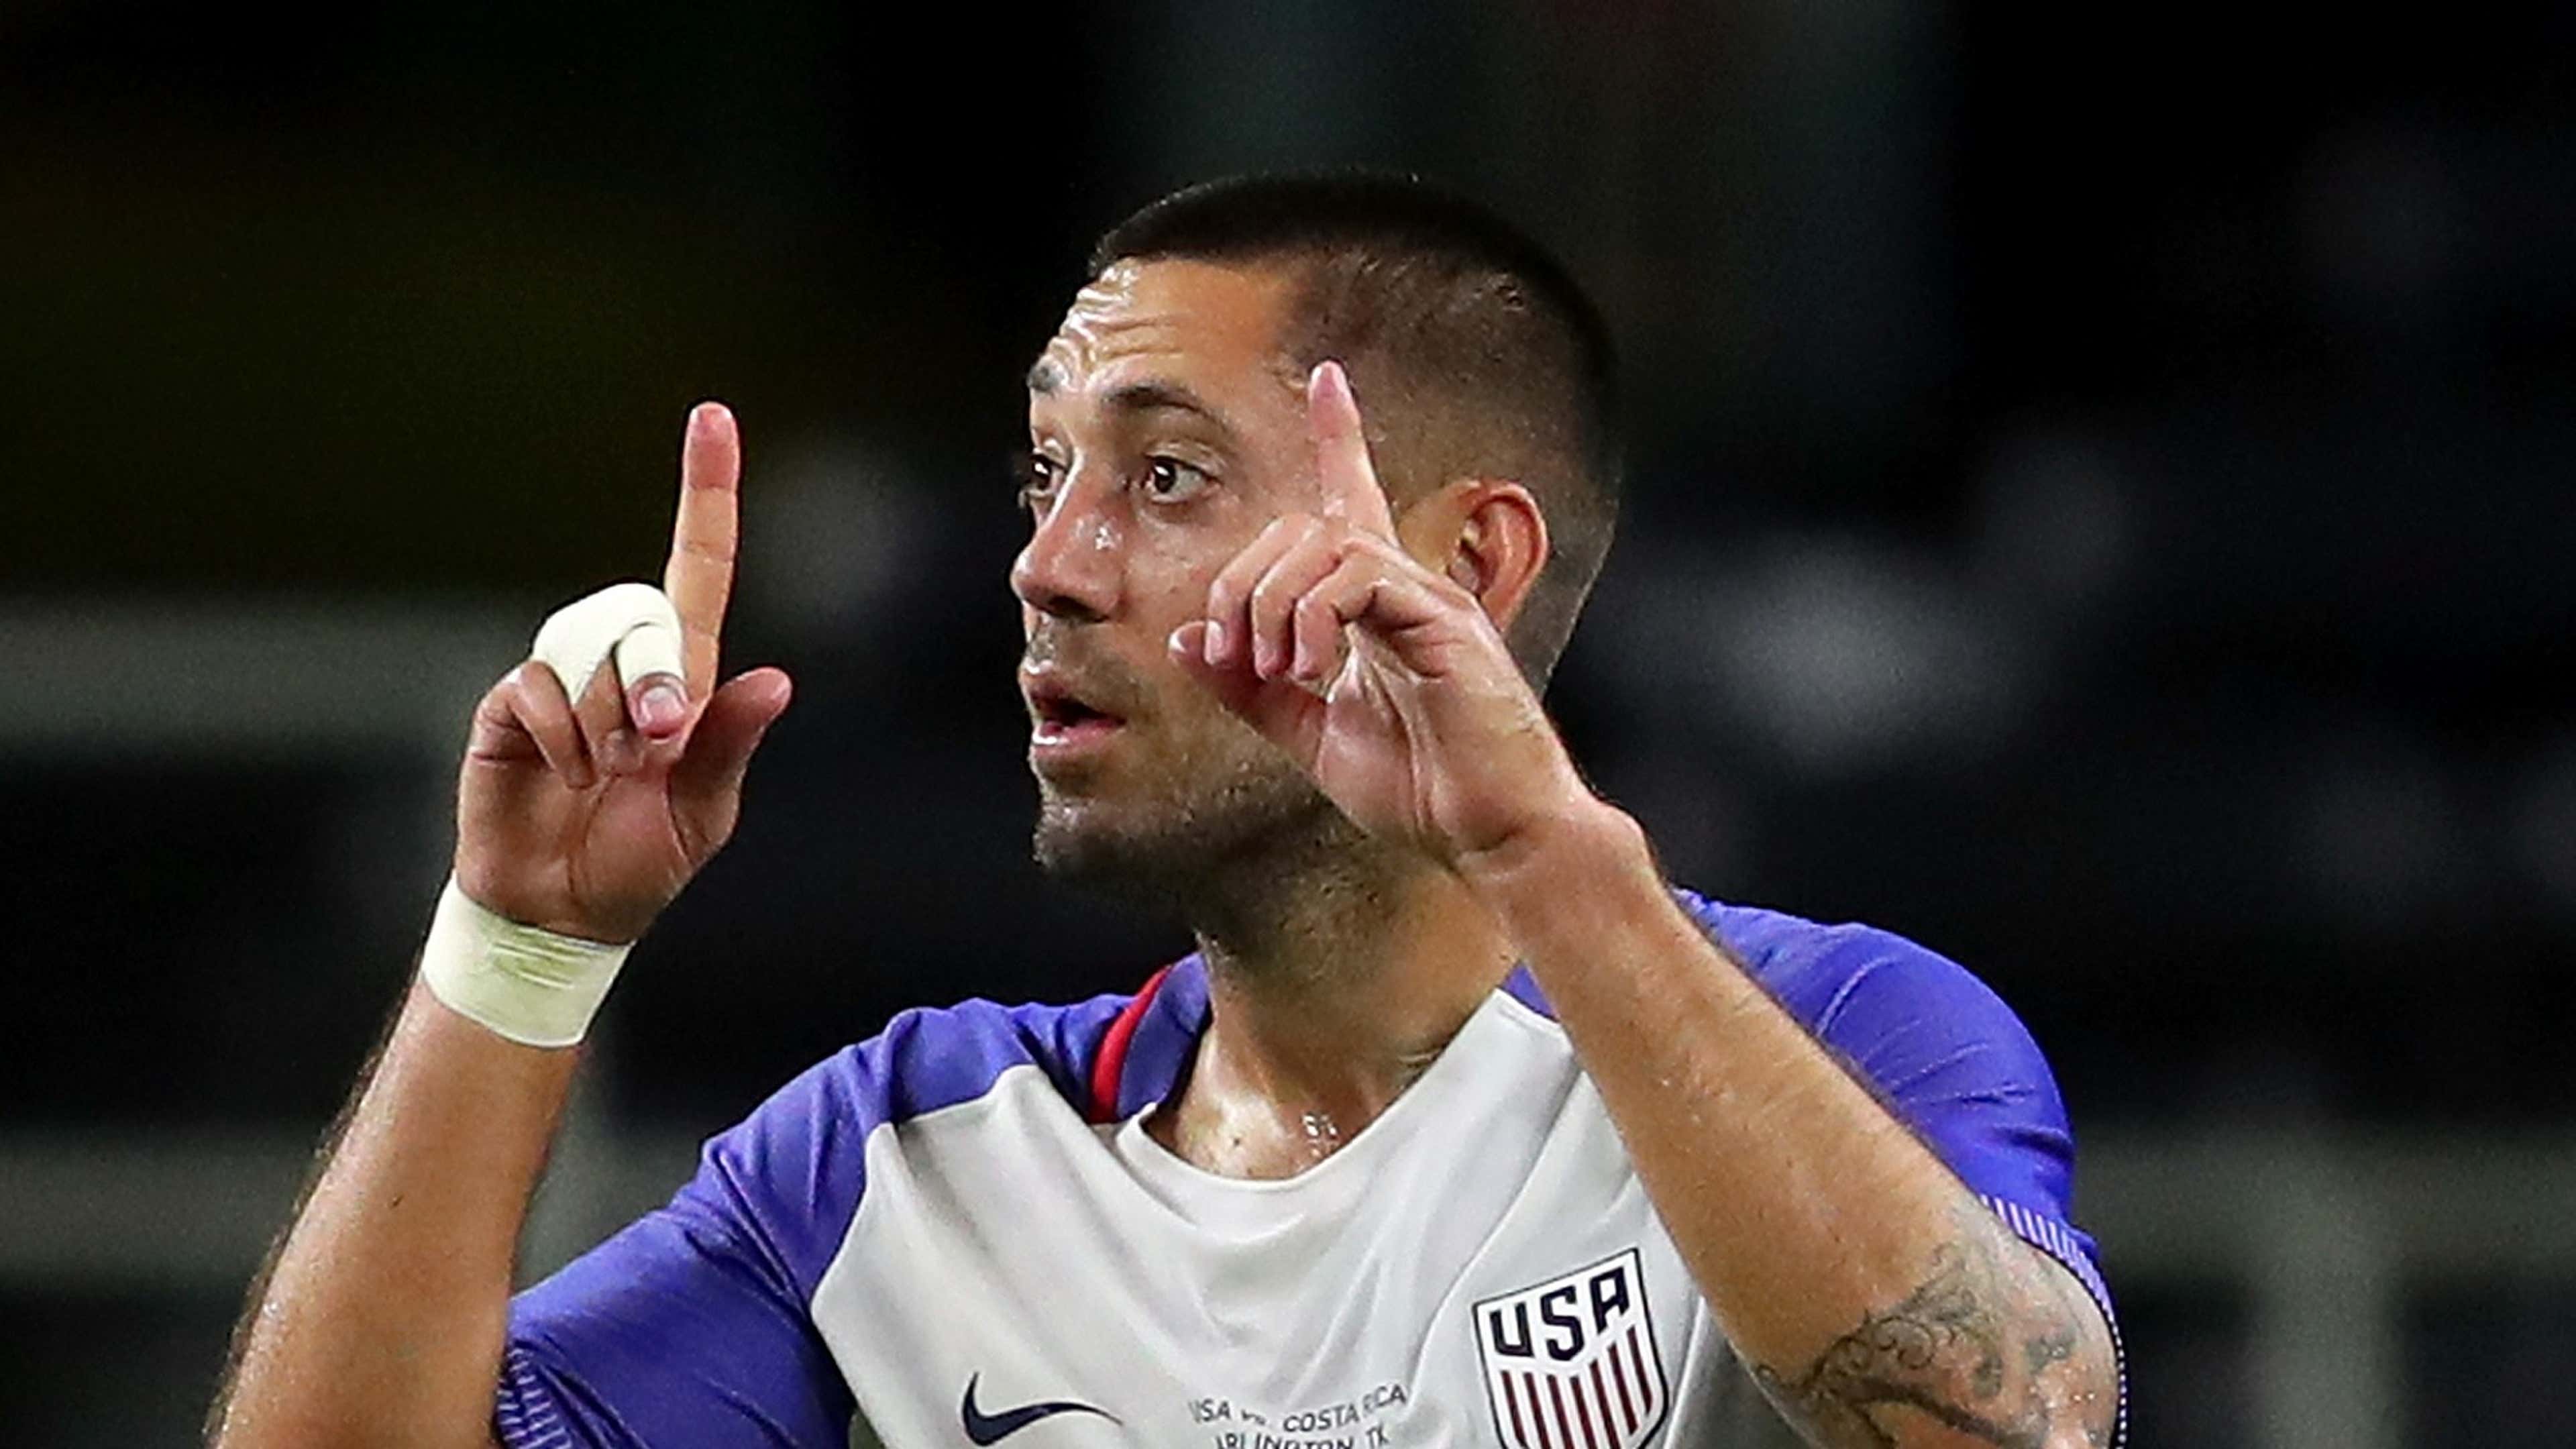 Former Revolution star Clint Dempsey retires from soccer - The